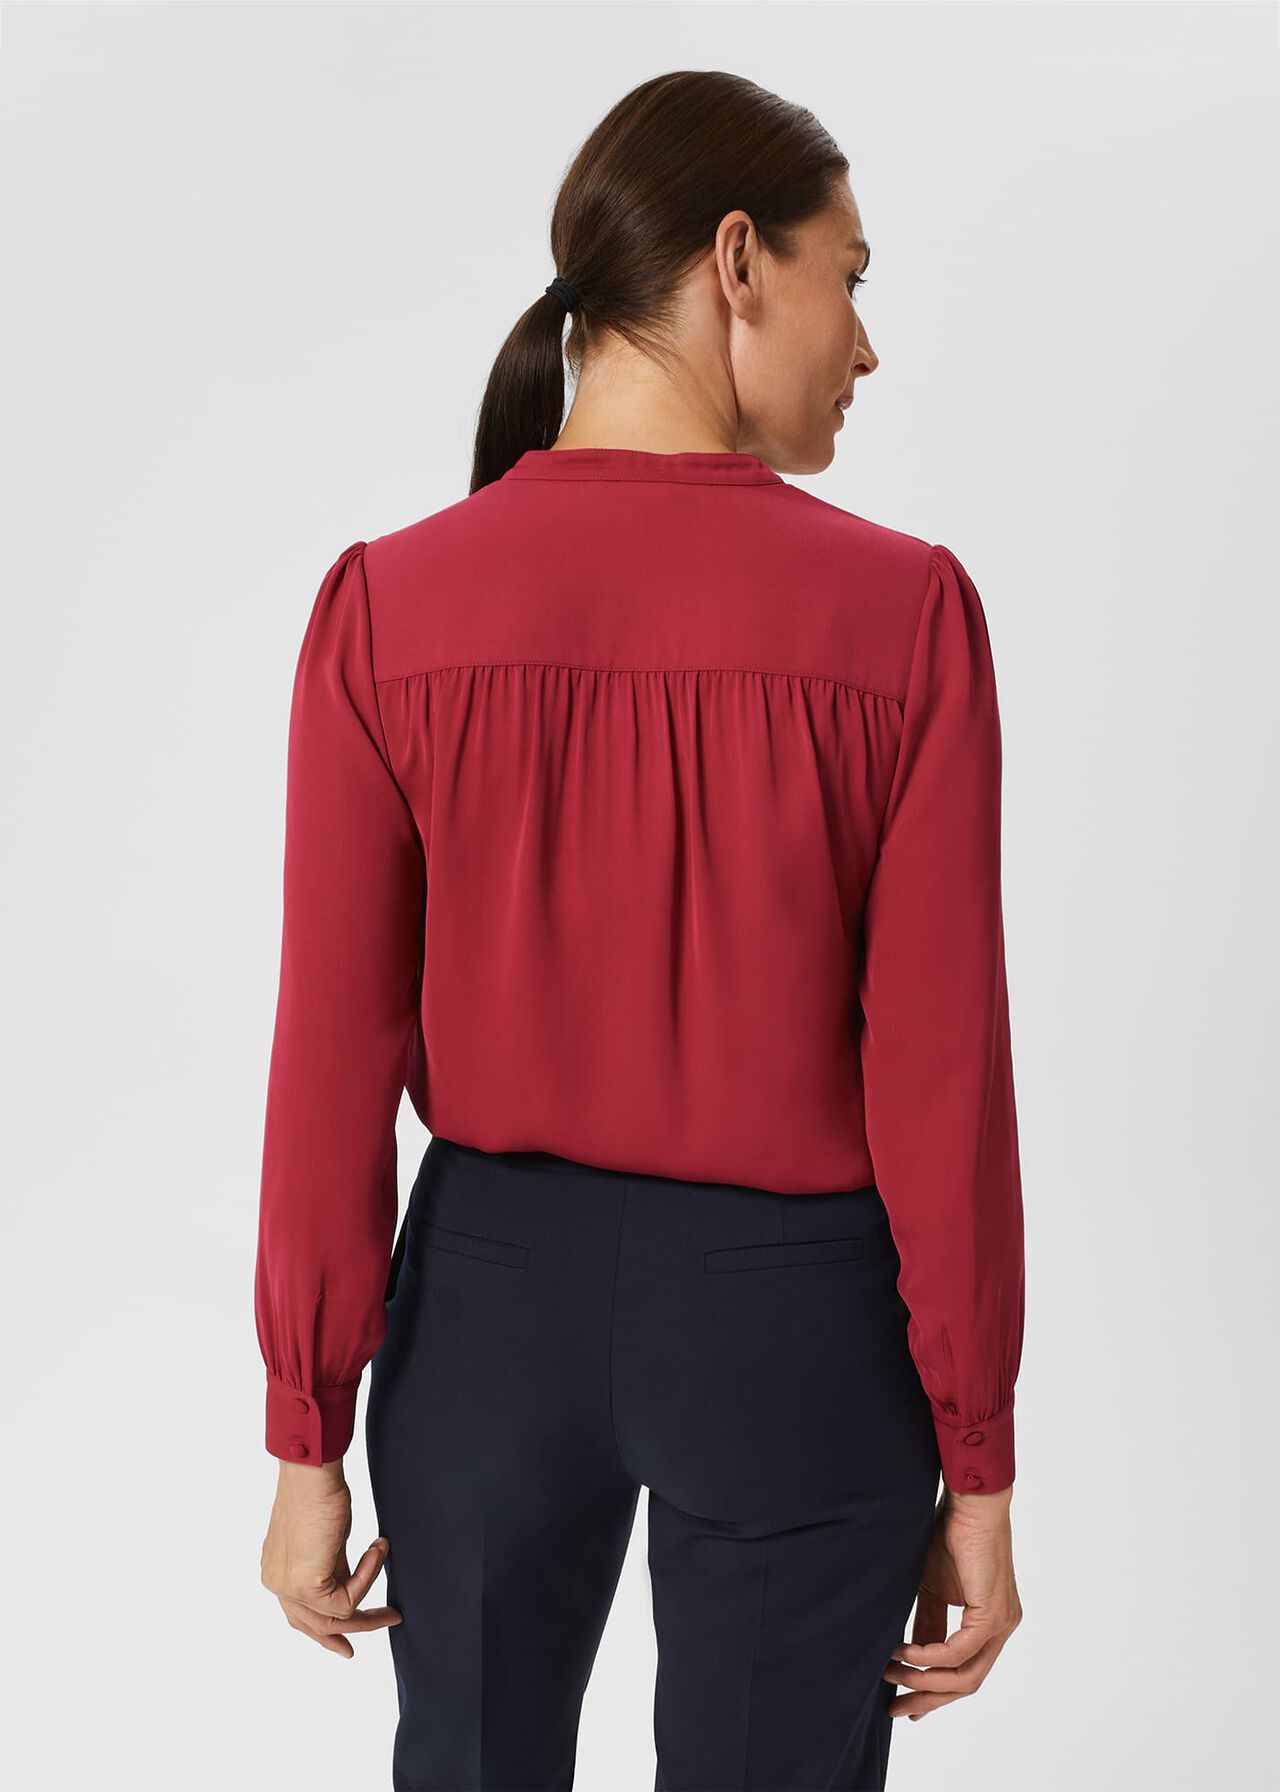 Rue Top, Rich Berry Red, hi-res